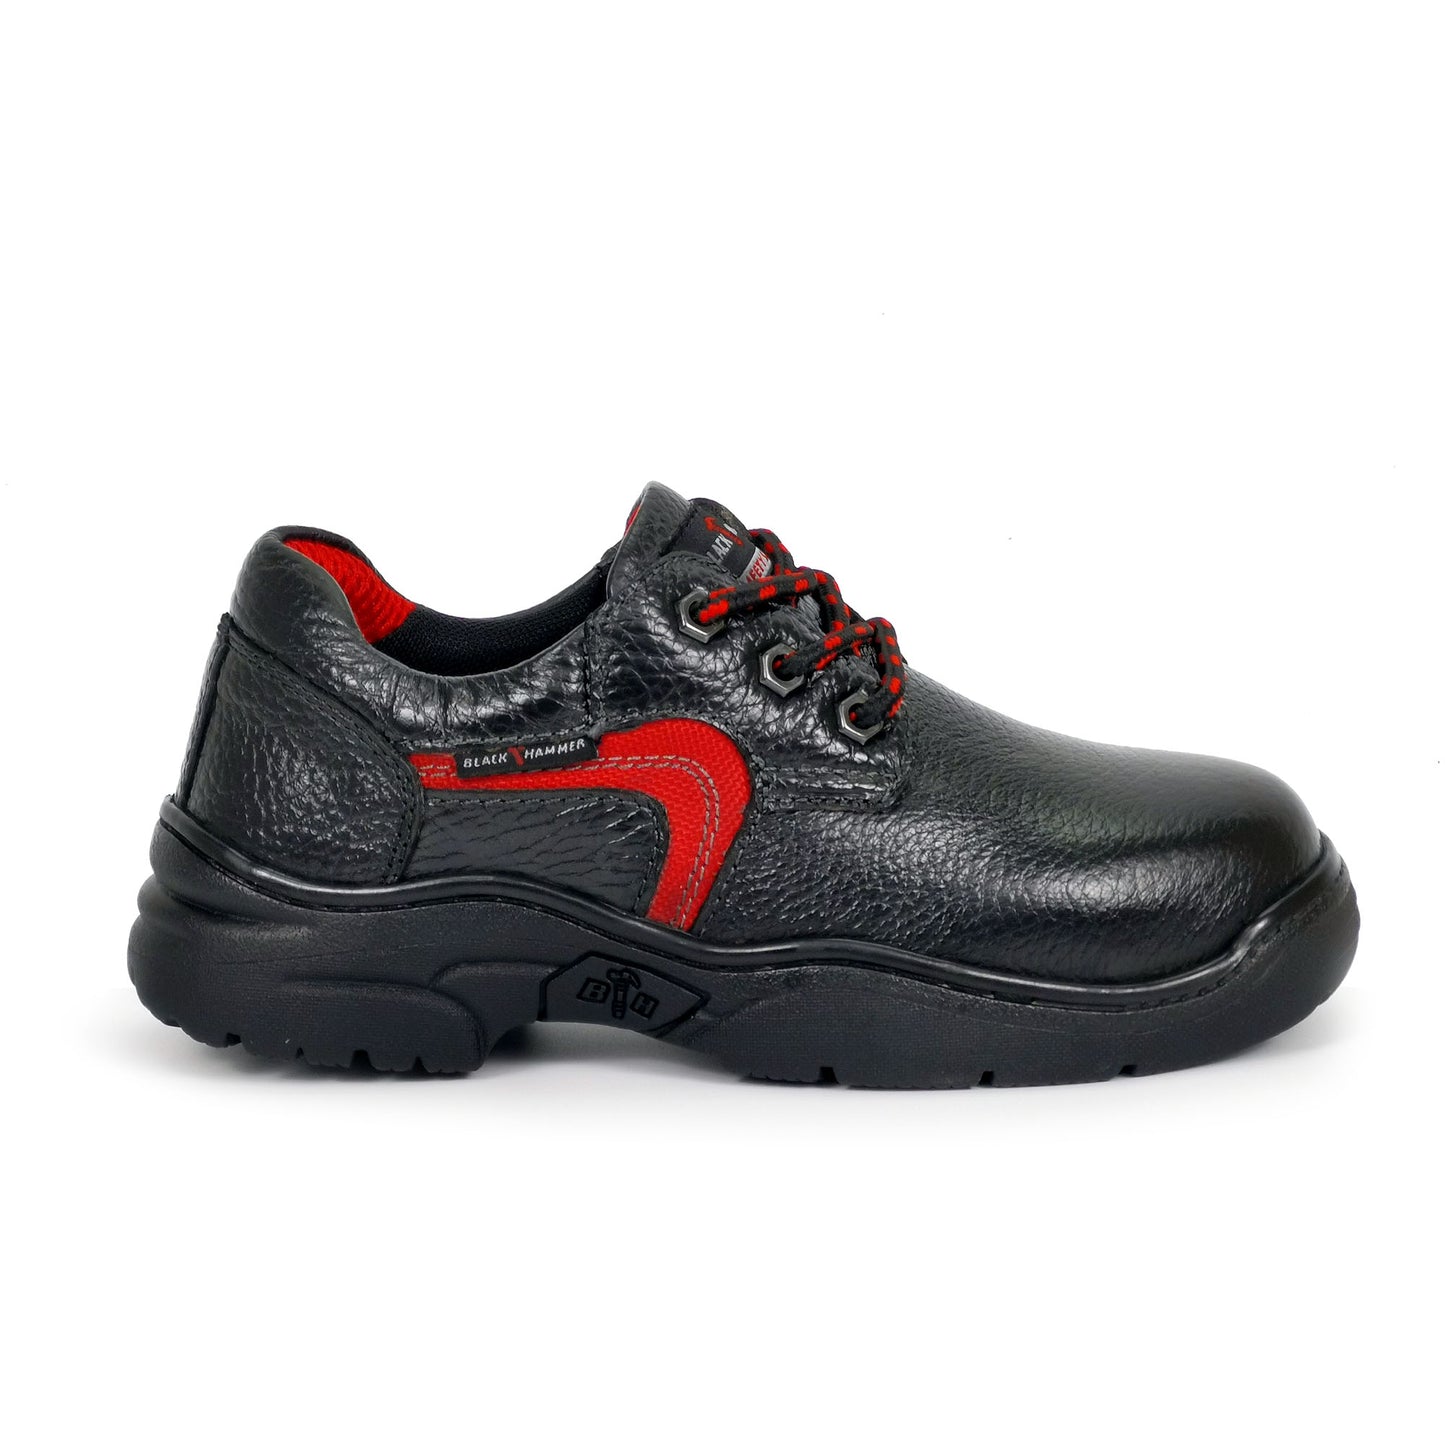 Black Hammer Low-cut Lace Up Ladies Safety Shoes BH 3881